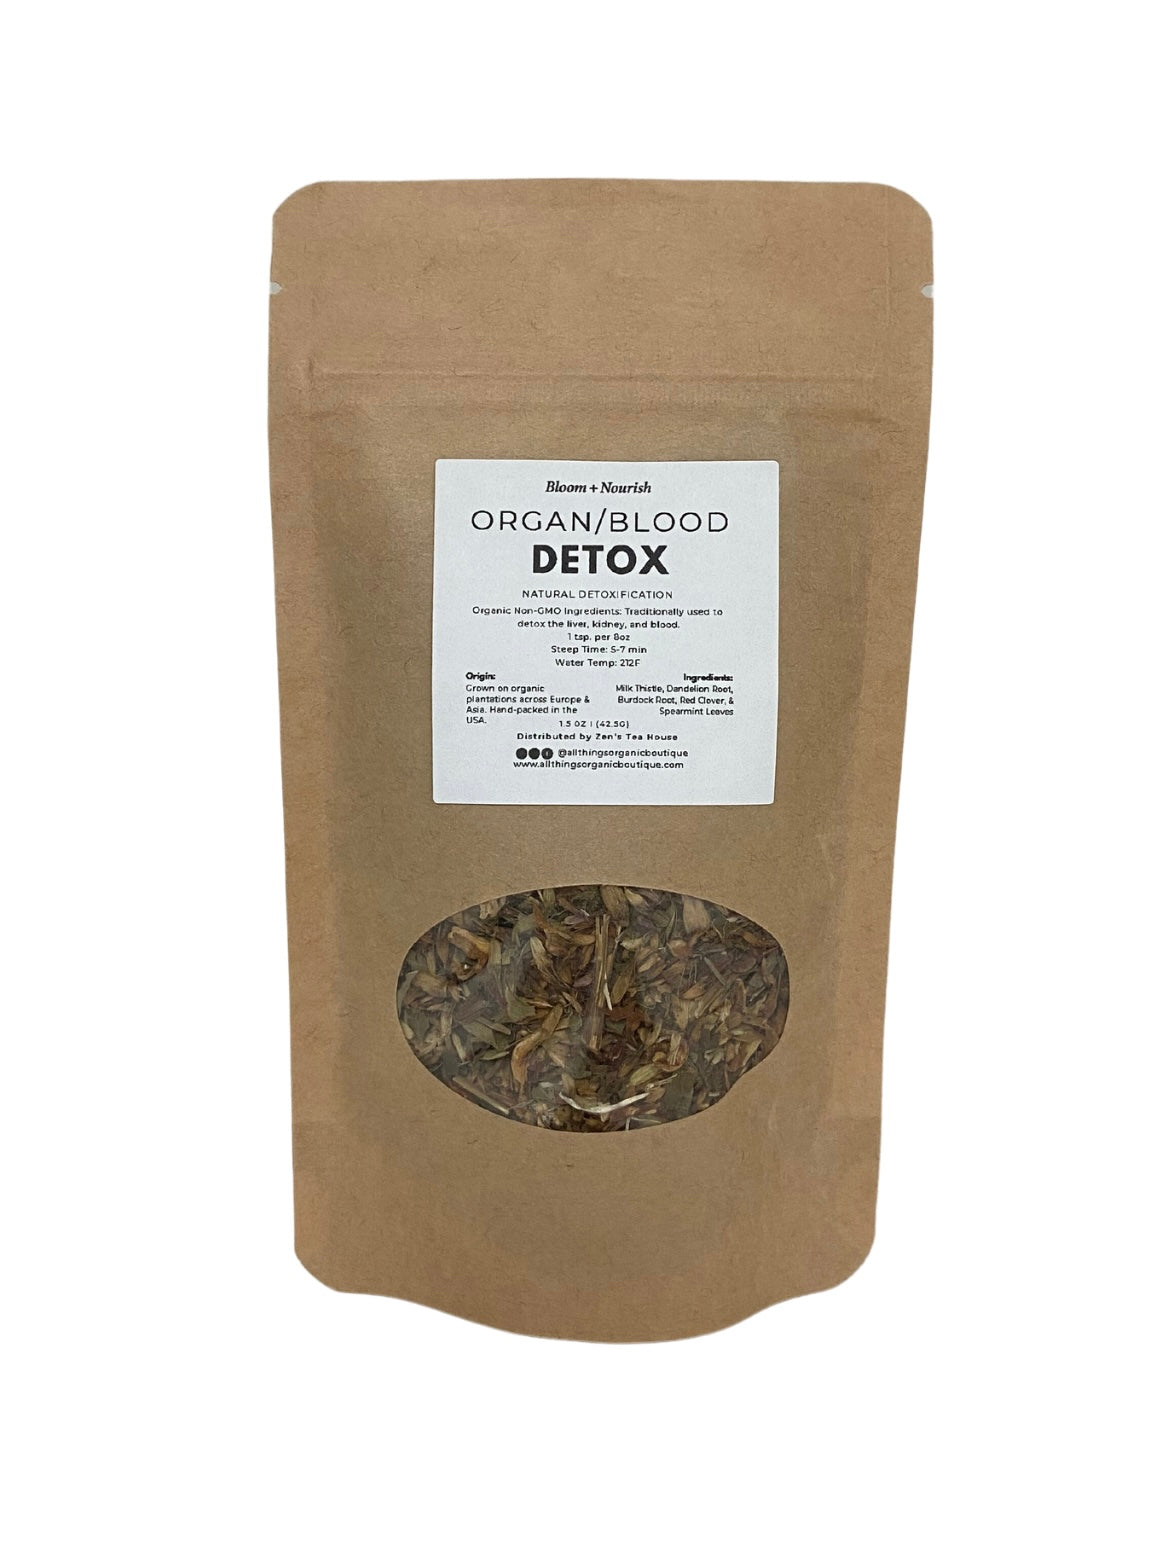 Organ & Blood Detox detoxification tea, specifically used to detox the liver, kidney, and blood